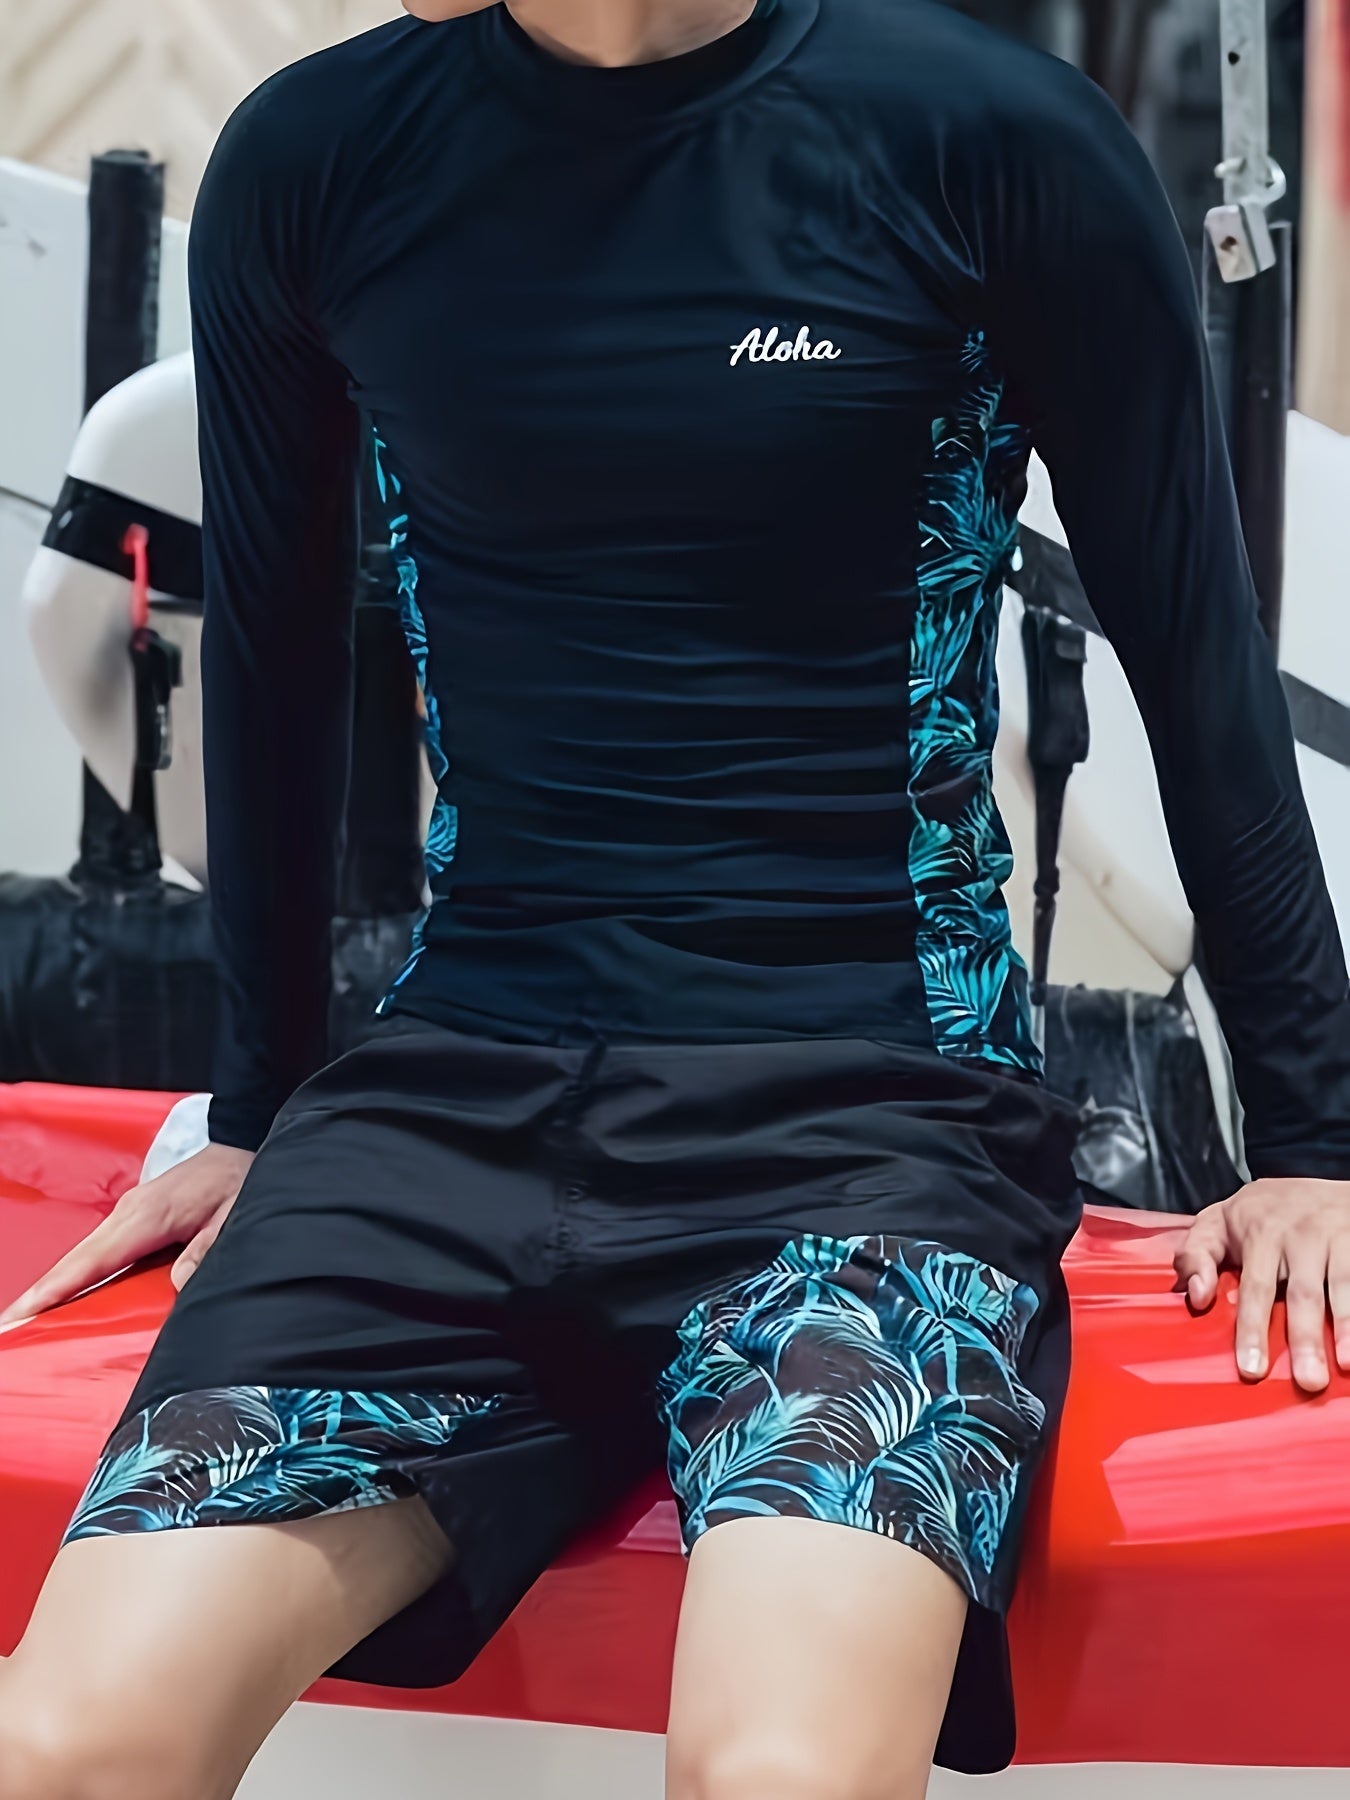 Men's Swimsuit, Quick-drying Skinny Fit Diving Suit, Leaf Pattern Long Sleeve T-shirt And Shorts, Highly Stretch Wetsuit For Diving Snorkeling